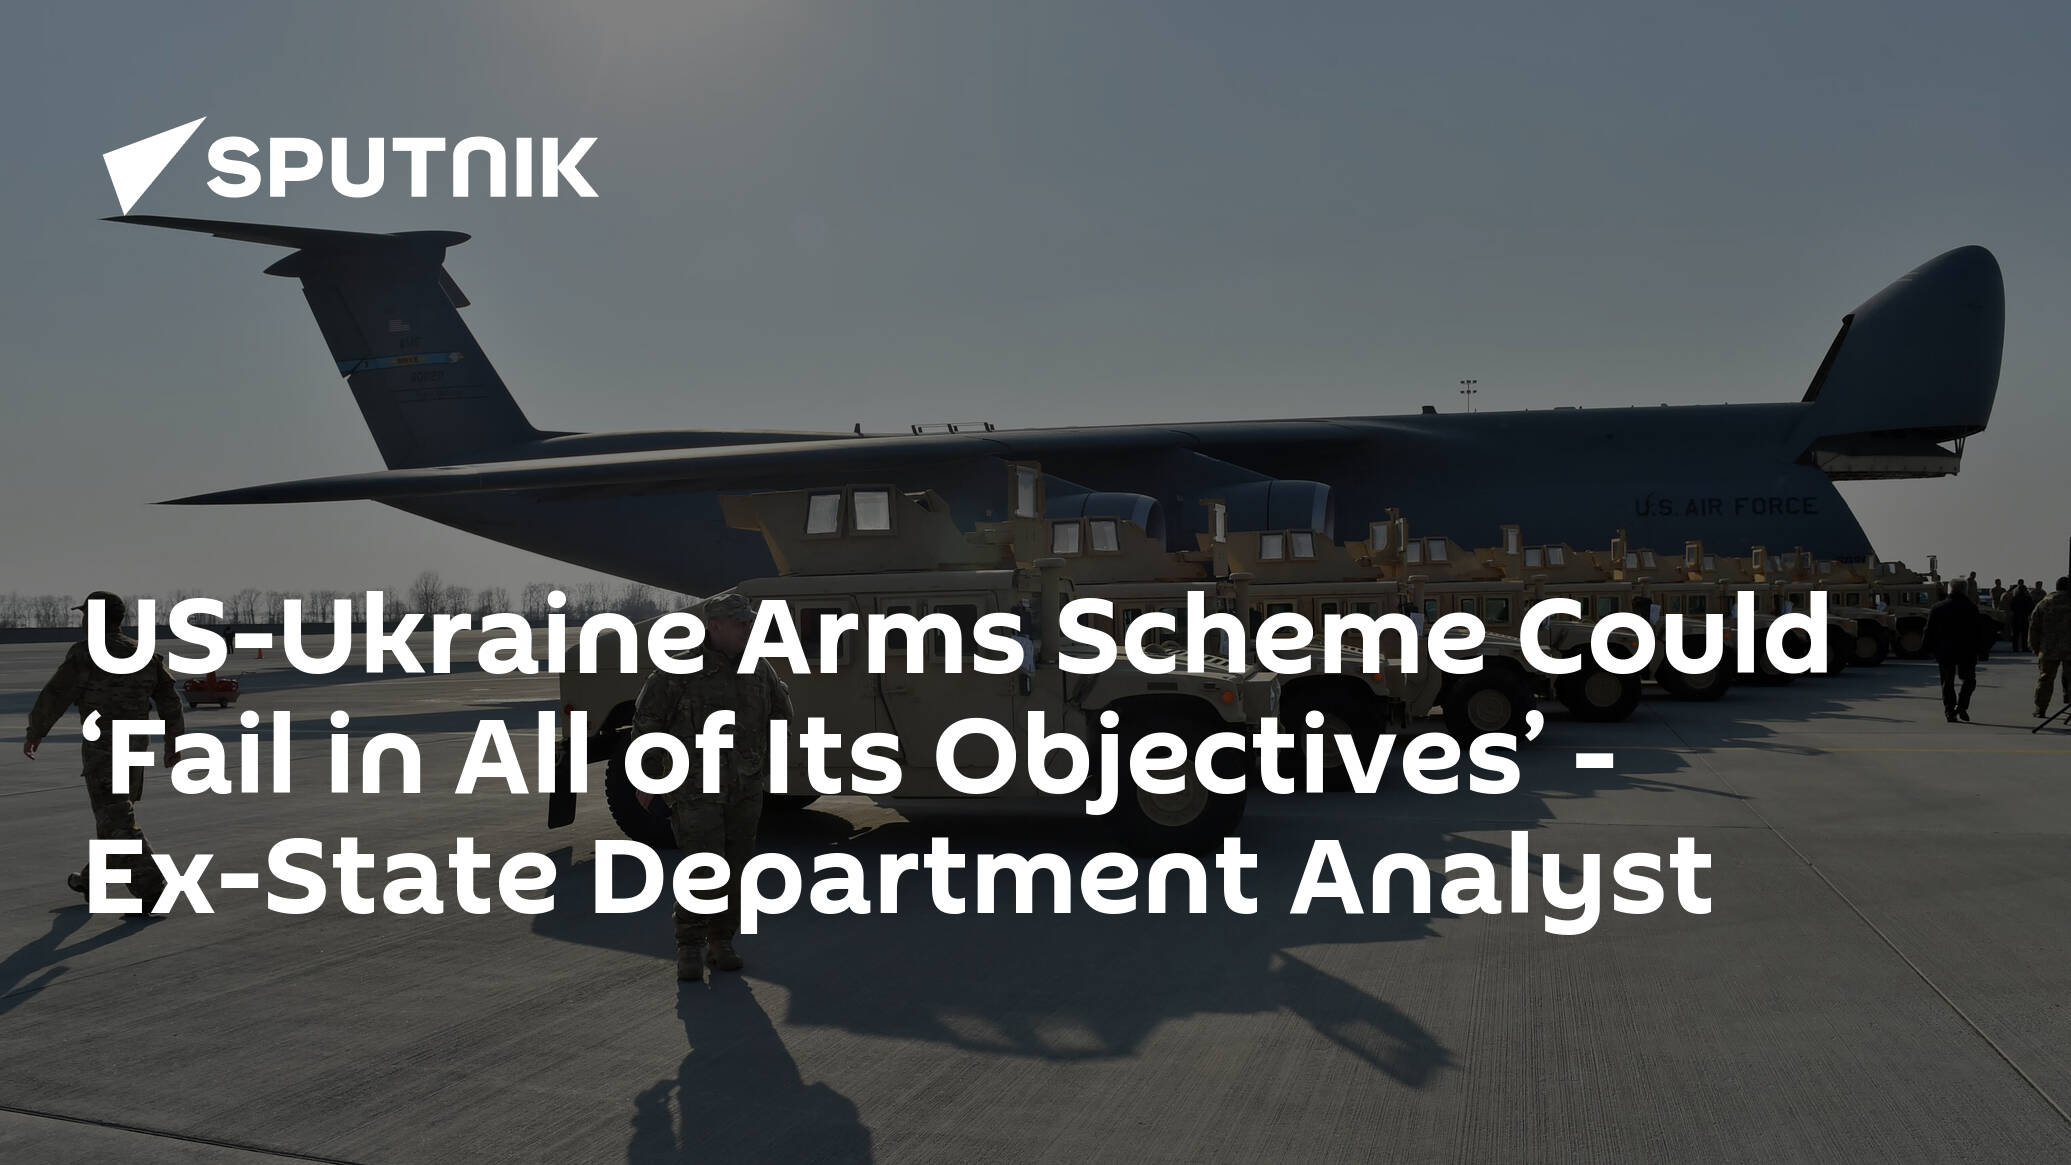 US-Ukraine Arms Scheme Could Fail in All of Its Objectives